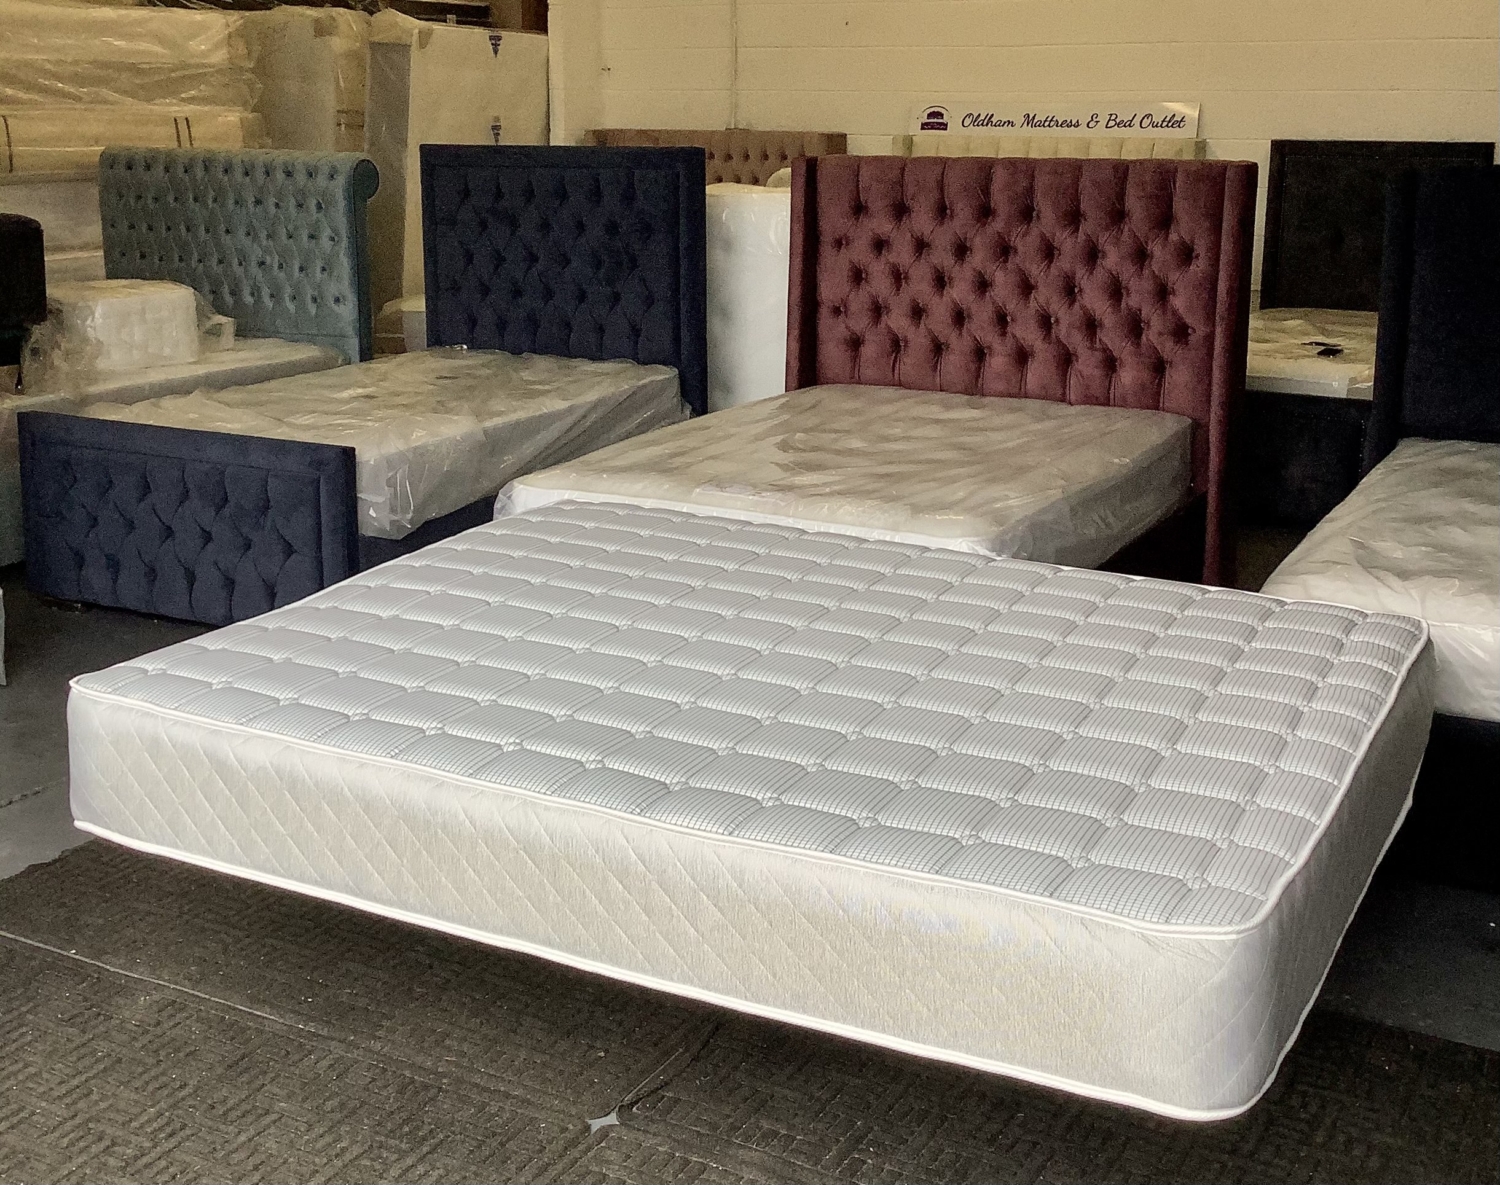 oldham mattress & bed outlet oldham